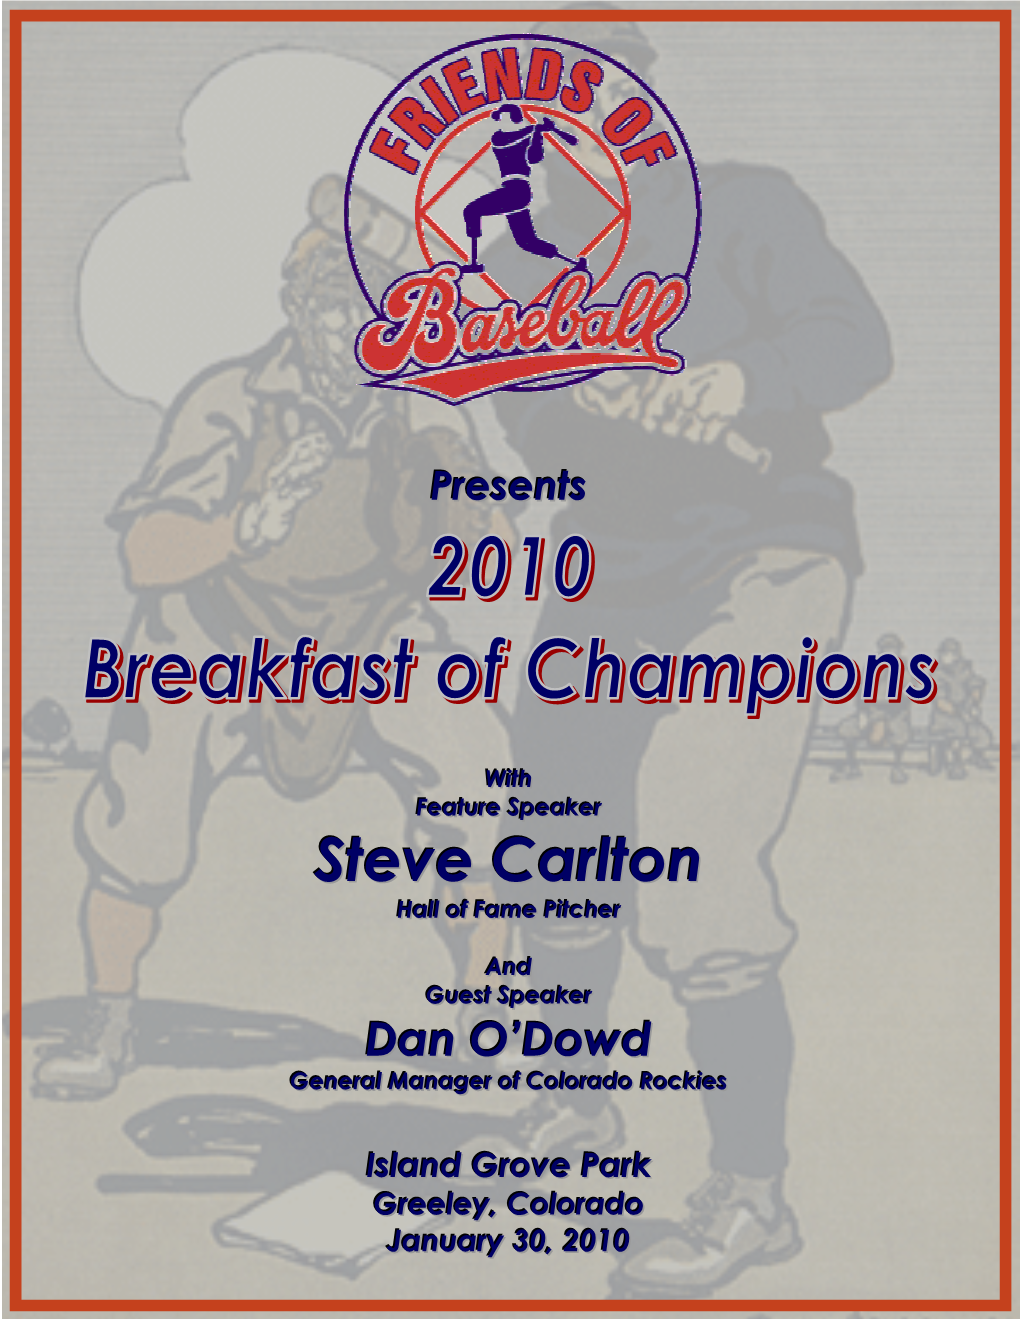 Steve Carlton (Born December 22, 1944) Is a Former Left-Handed Pitcher in Major League Baseball, from 1965 to 1988